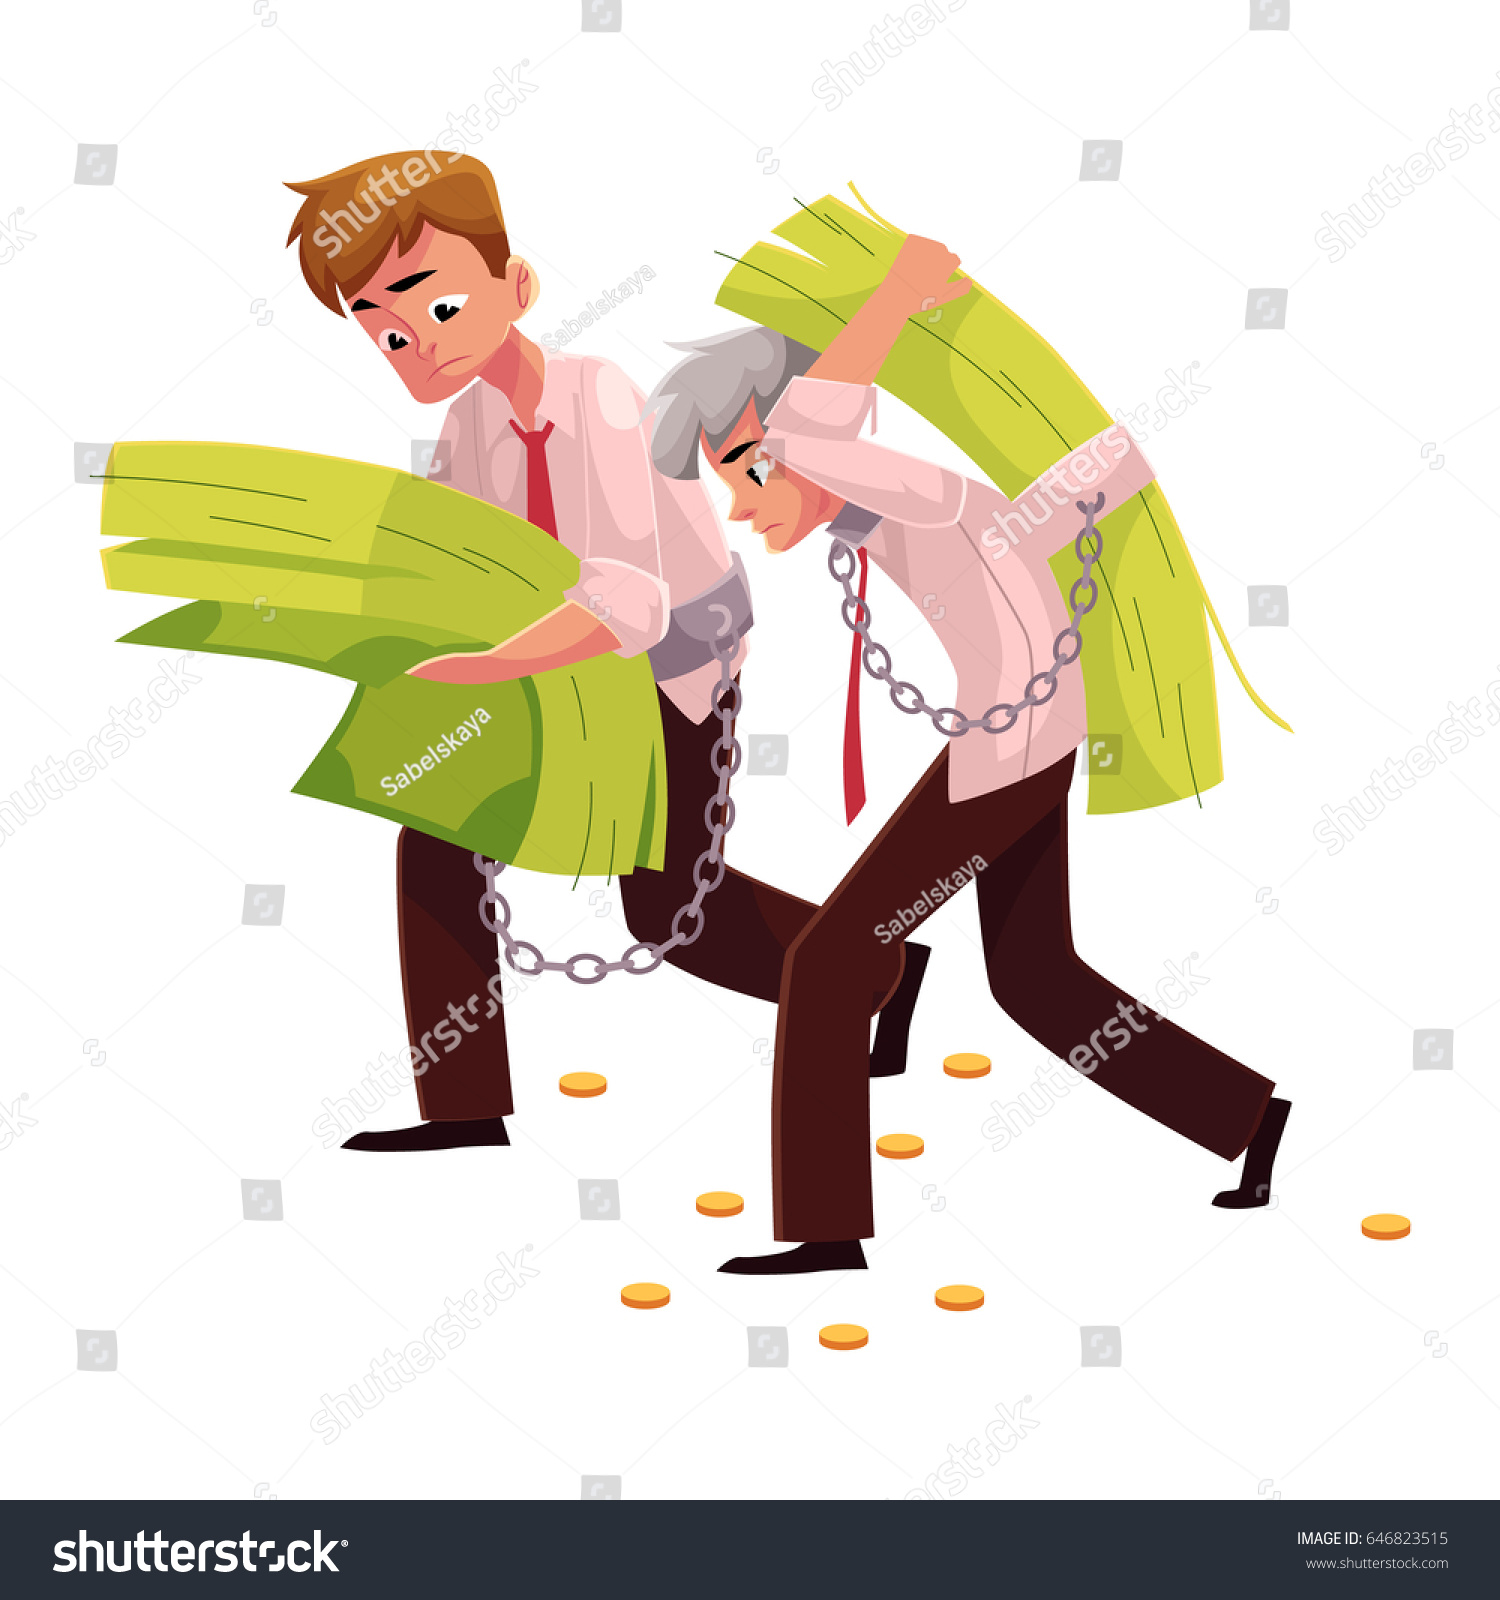 Two Men Young Old Carrying Huge Stock Vector 646823515 - Shutterstock